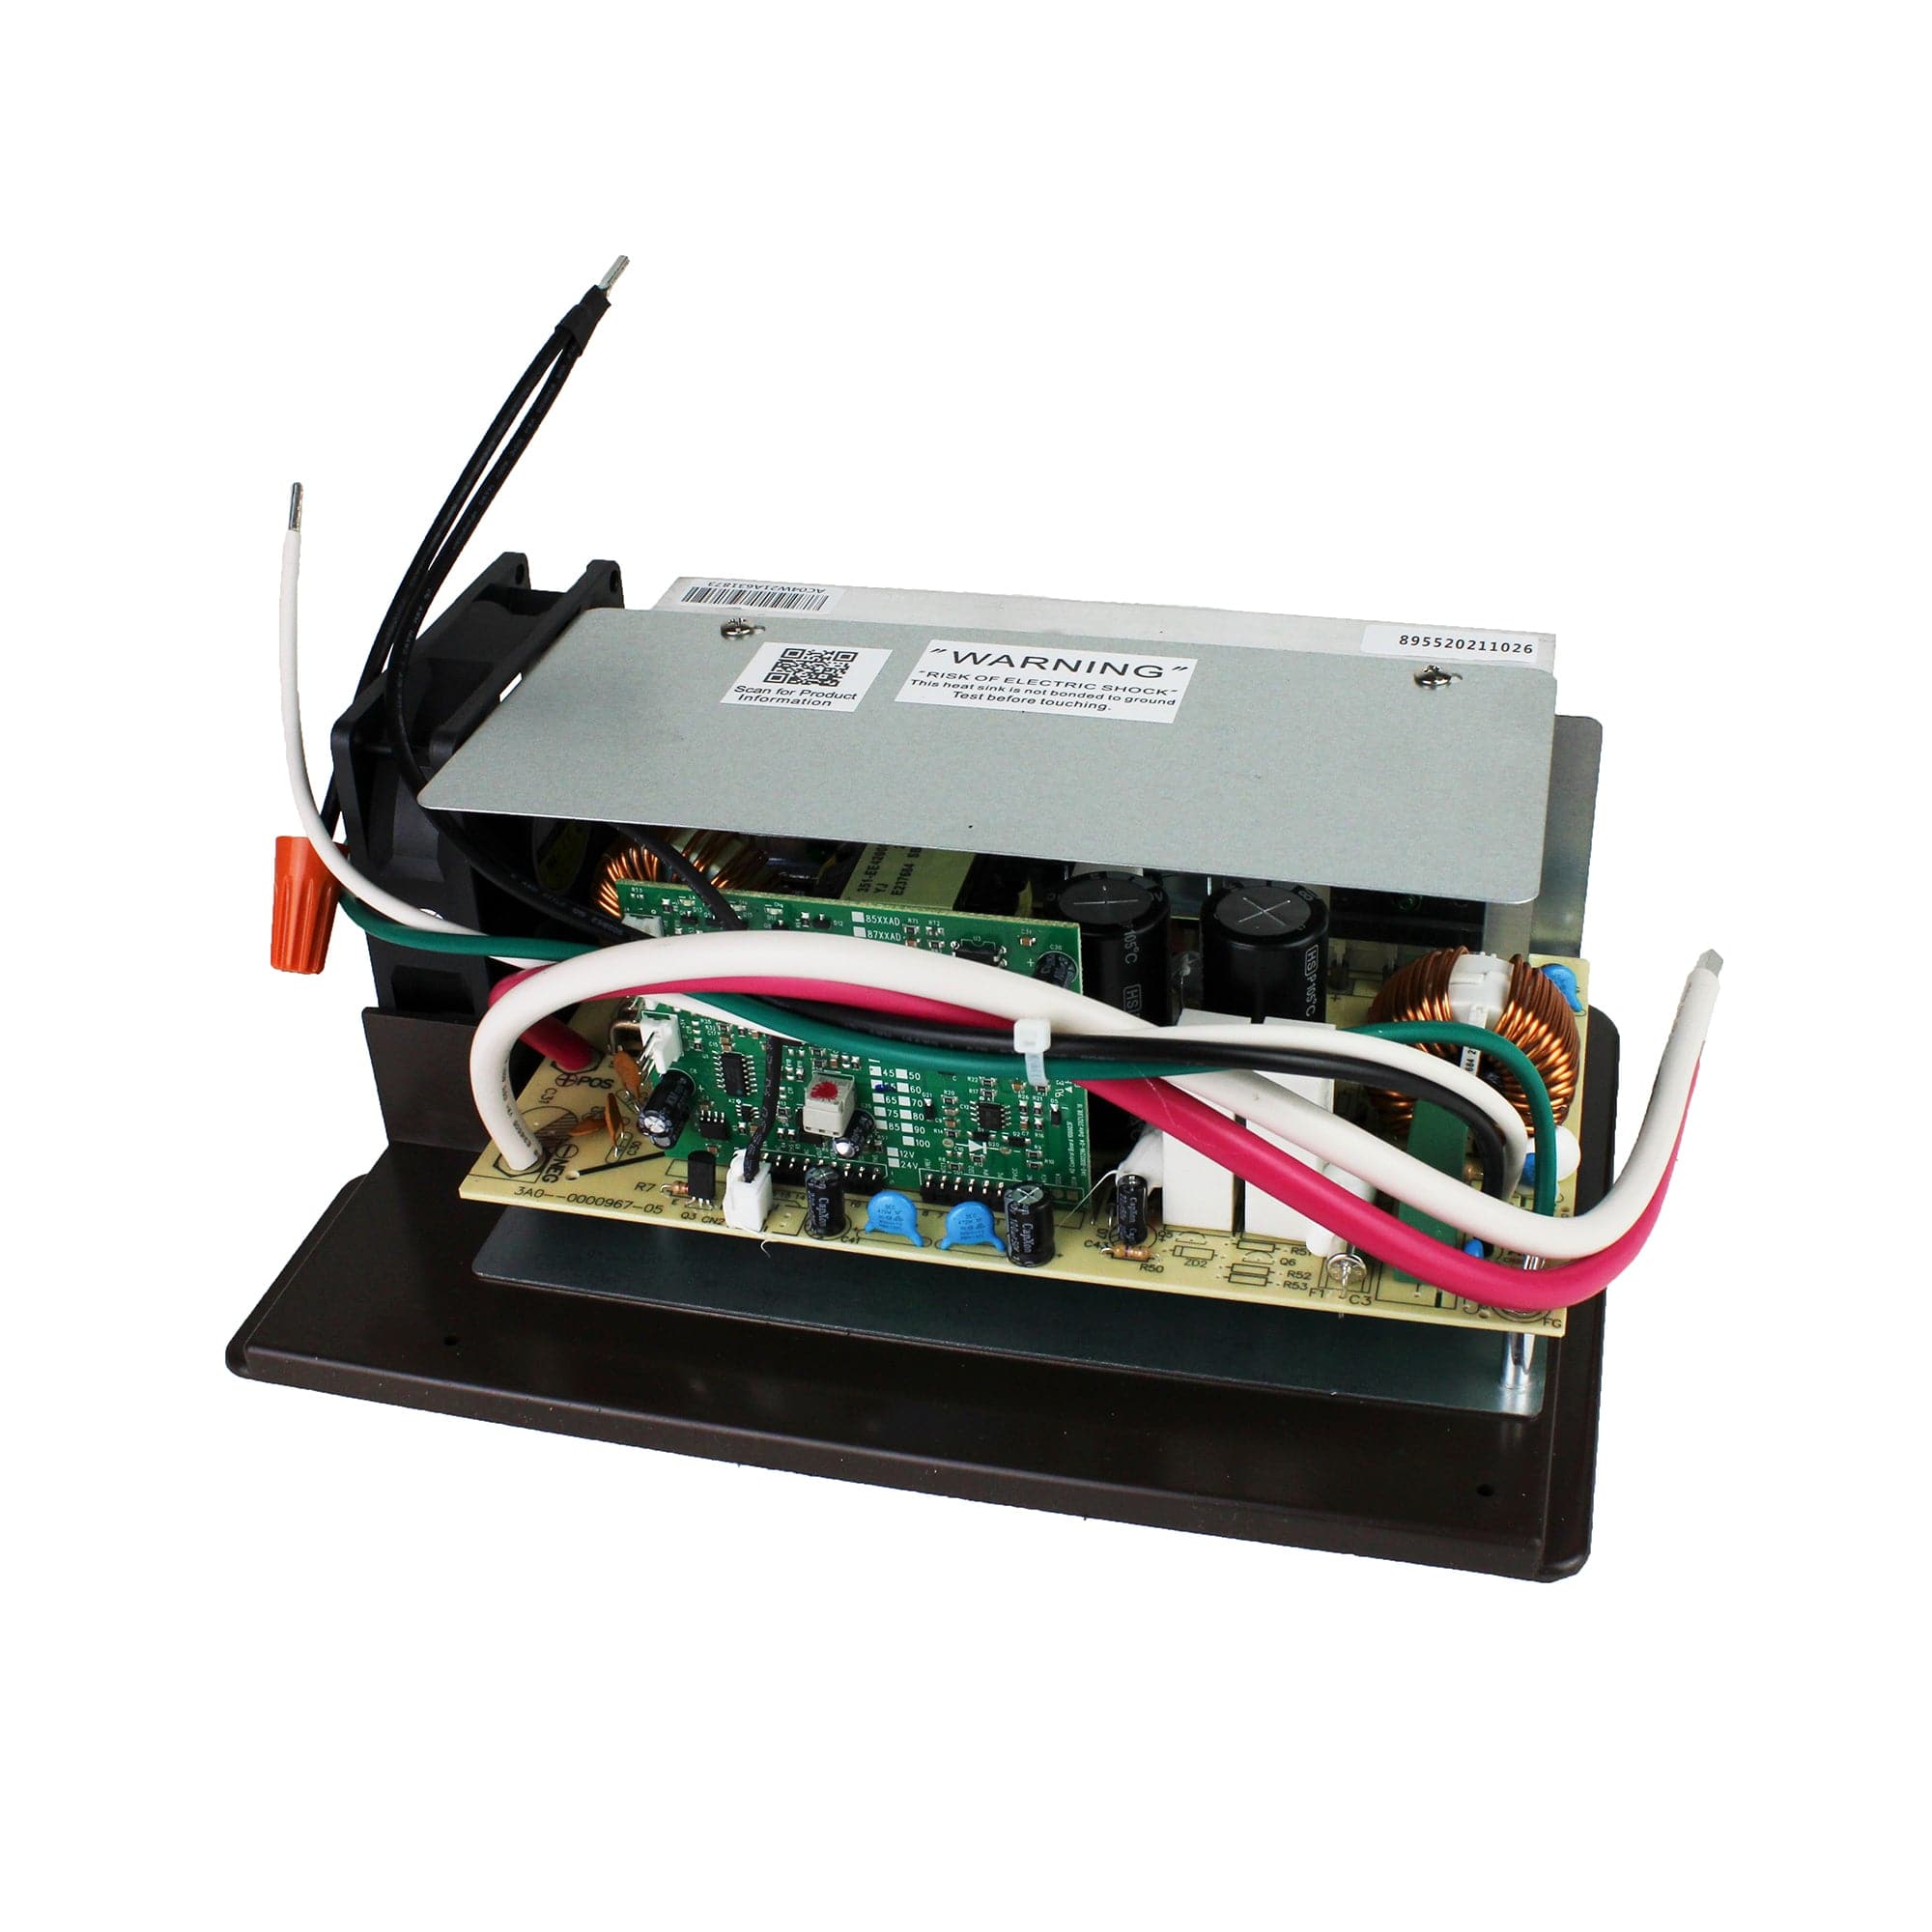 WFCO WF-8955-AD-MBA Converter Lower Main Board Assembly 55 Amps DC, 105-130 VAC, 60Hz, 950W